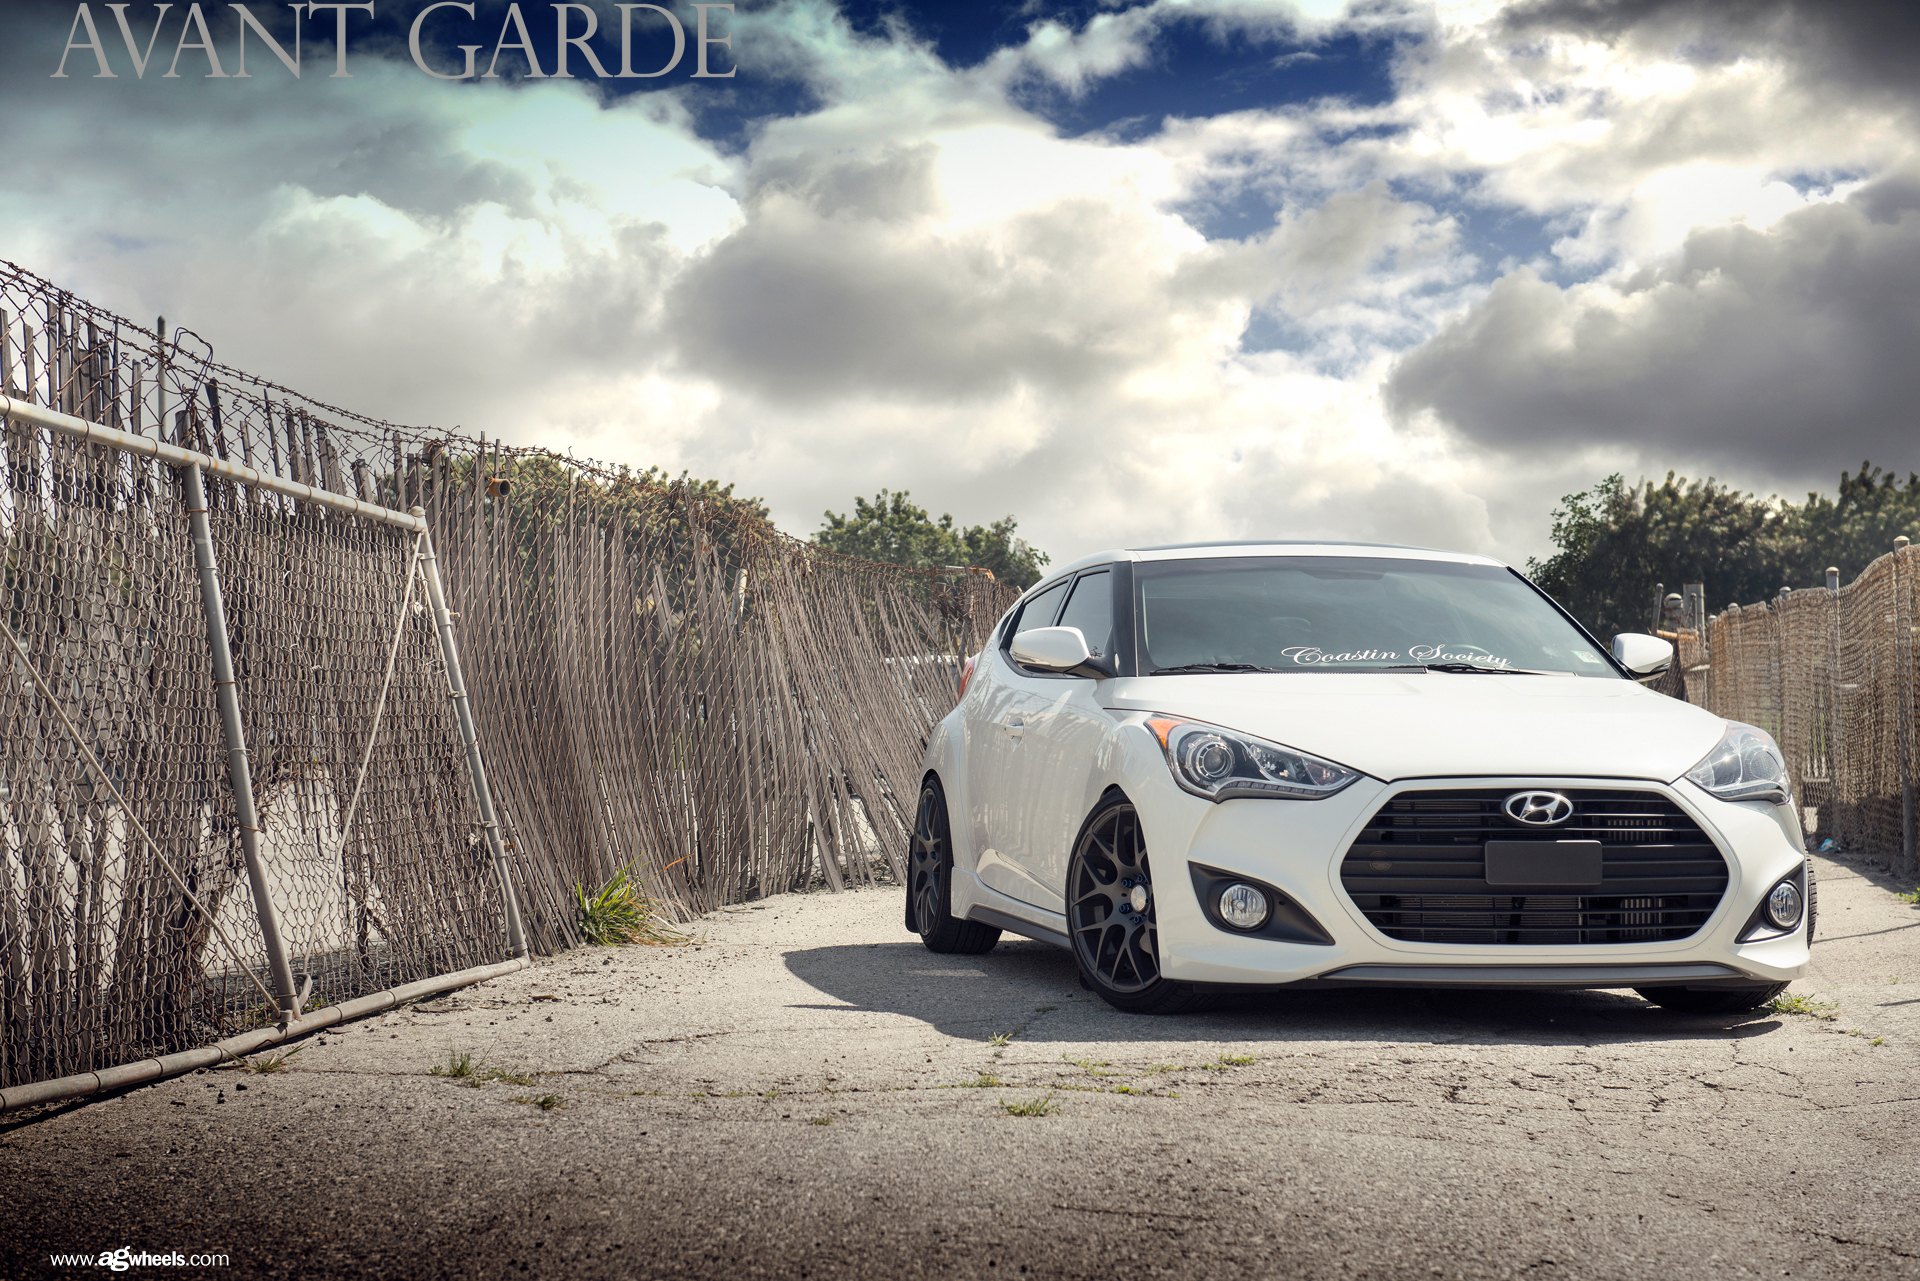 Blacked Out Grille on White Hyundai Veloster - Photo by Avant Garde Wheels